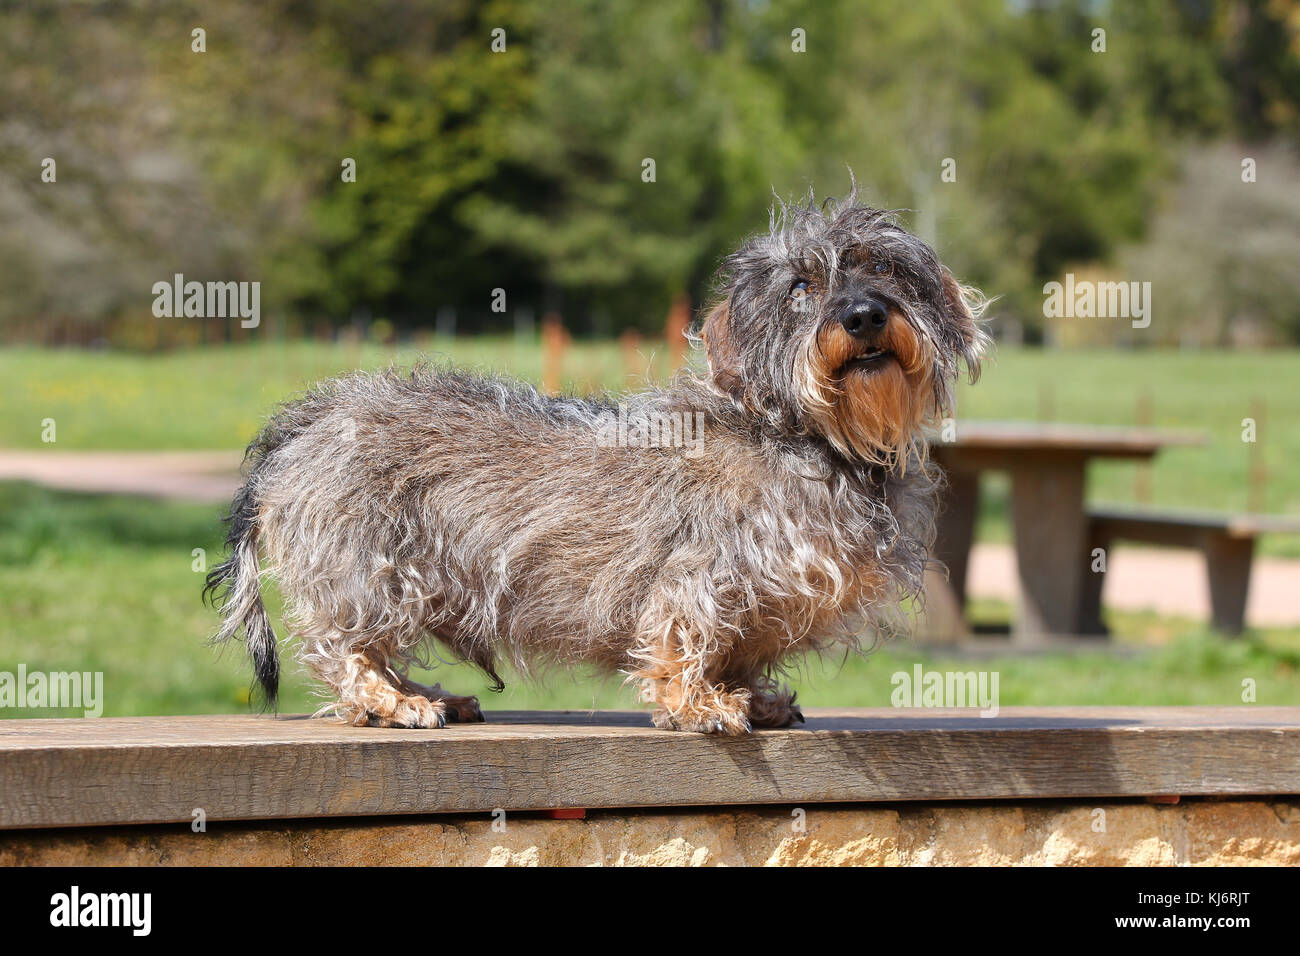 Wire-haired Miniature Dachshund dog standing on bench Stock Photo